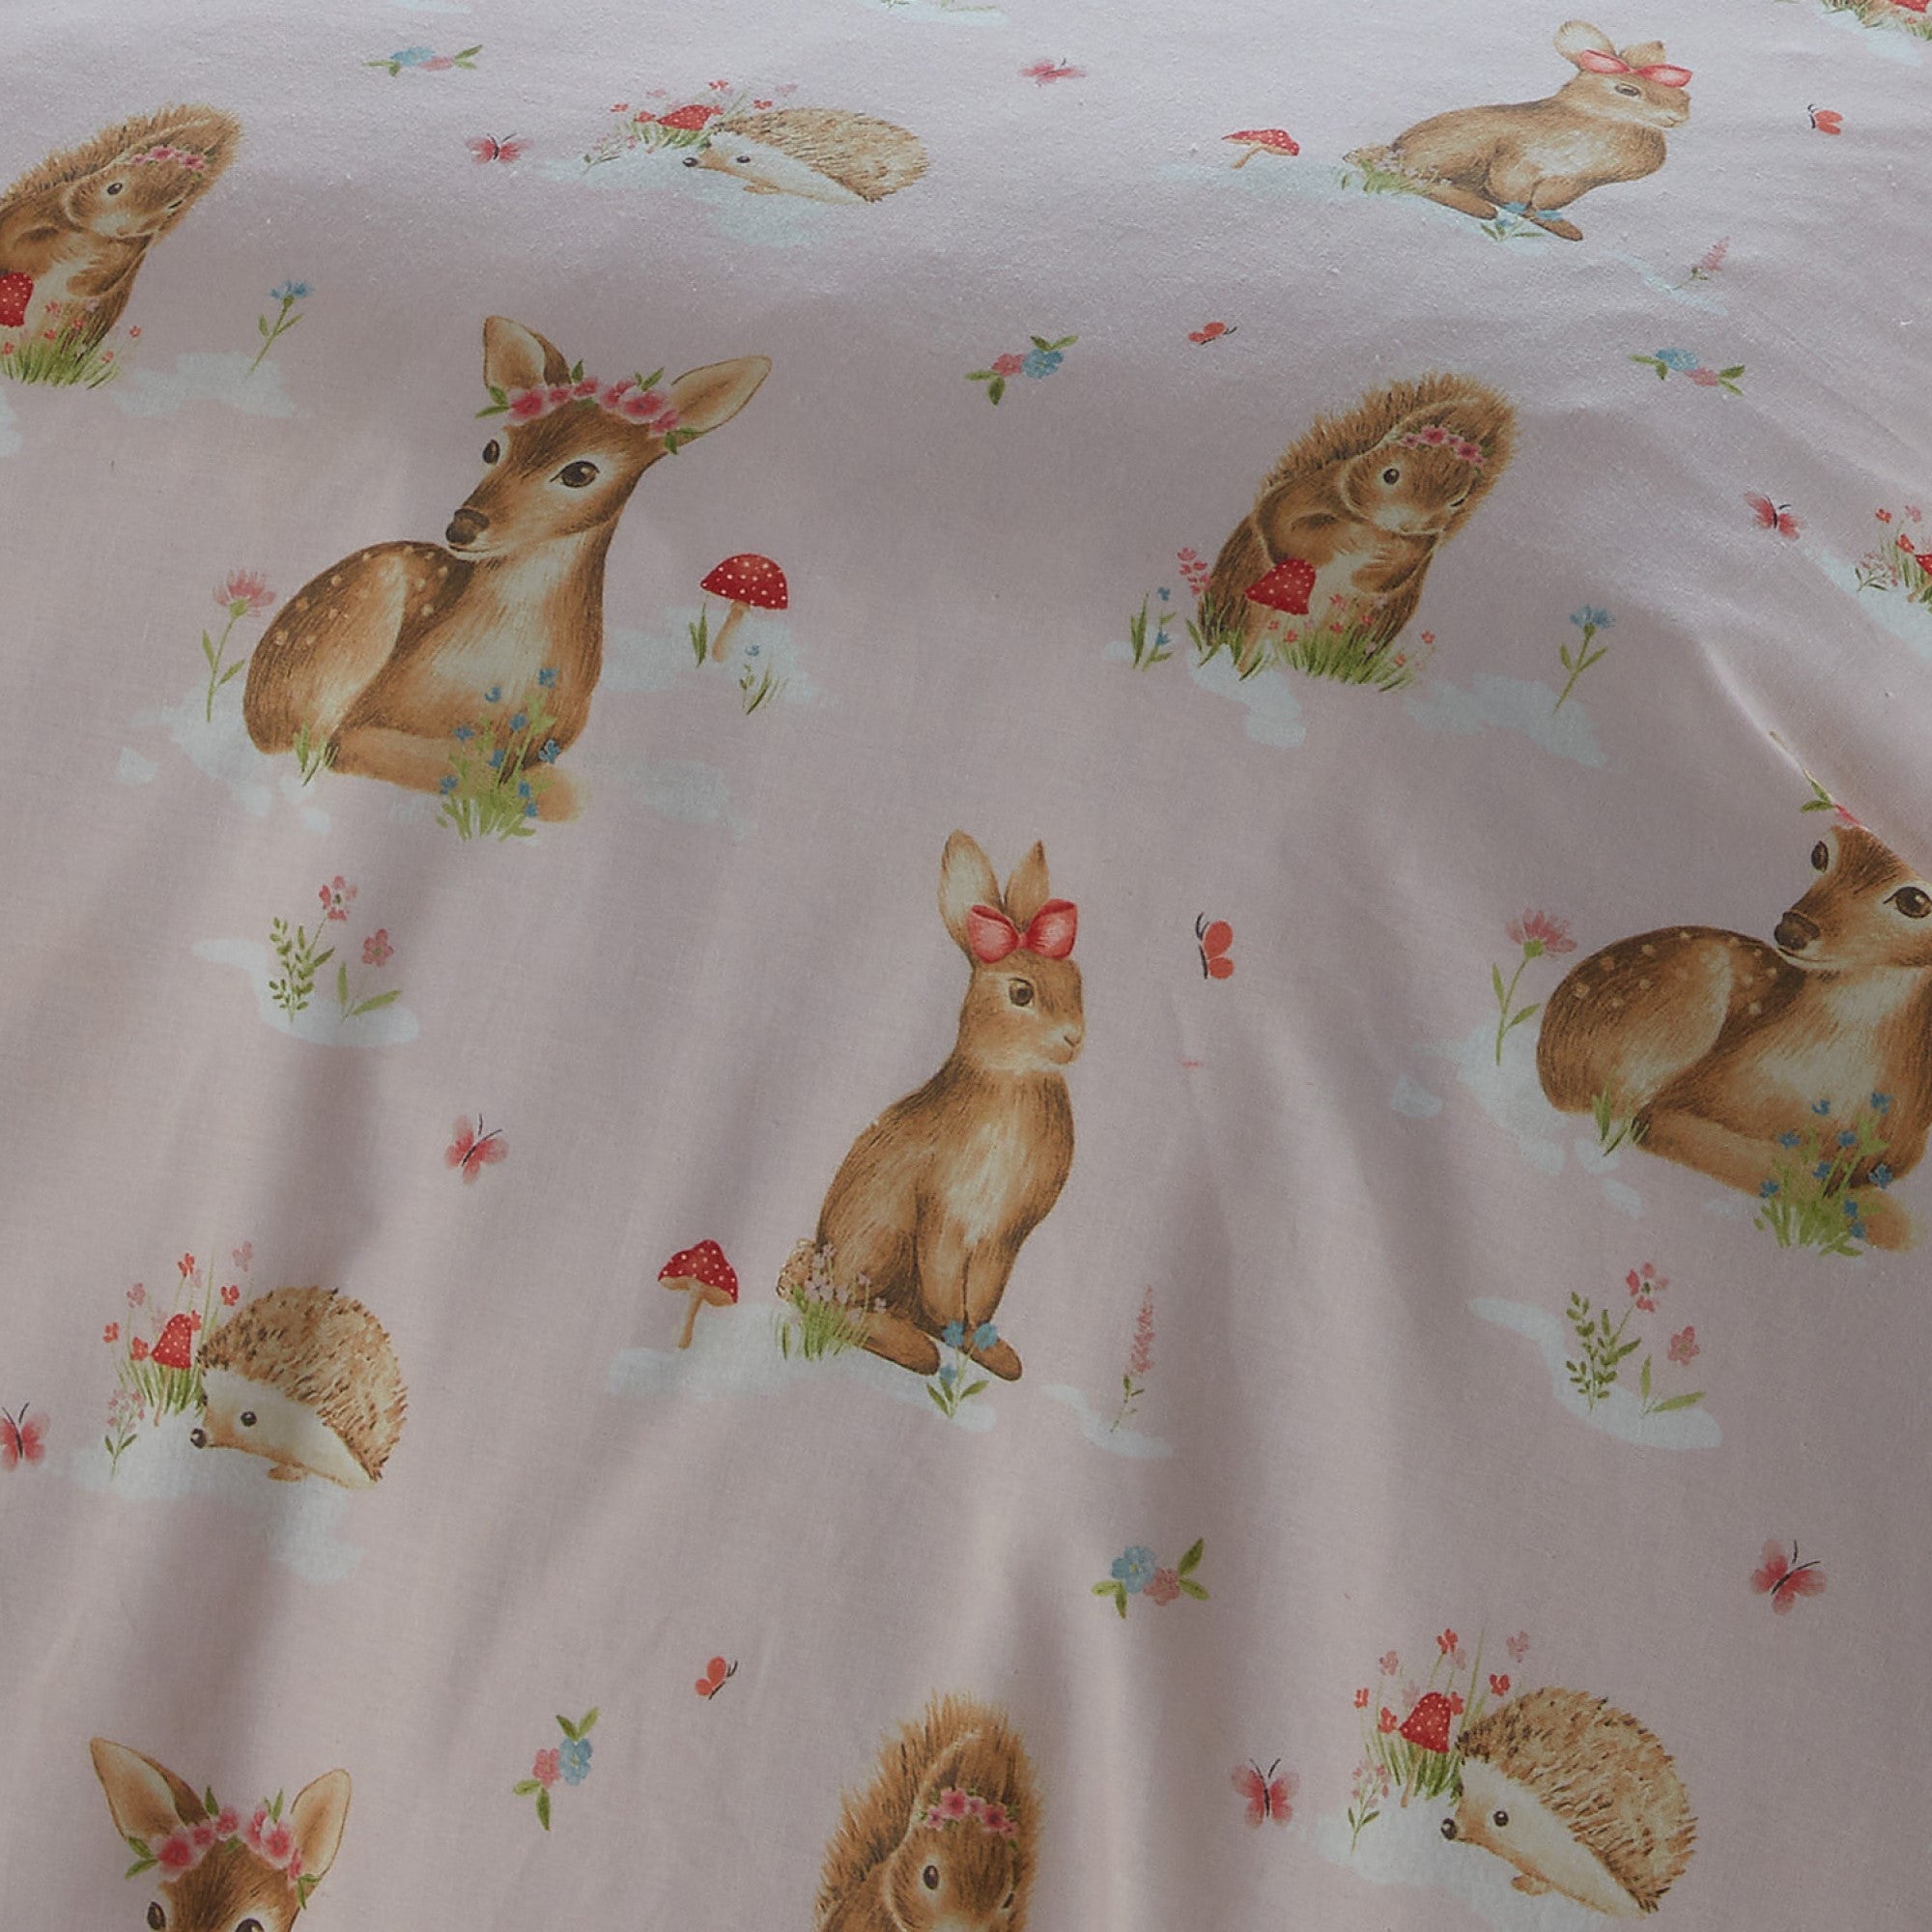 Duvet Cover Set Woodland Friends by Bedlam in Pink